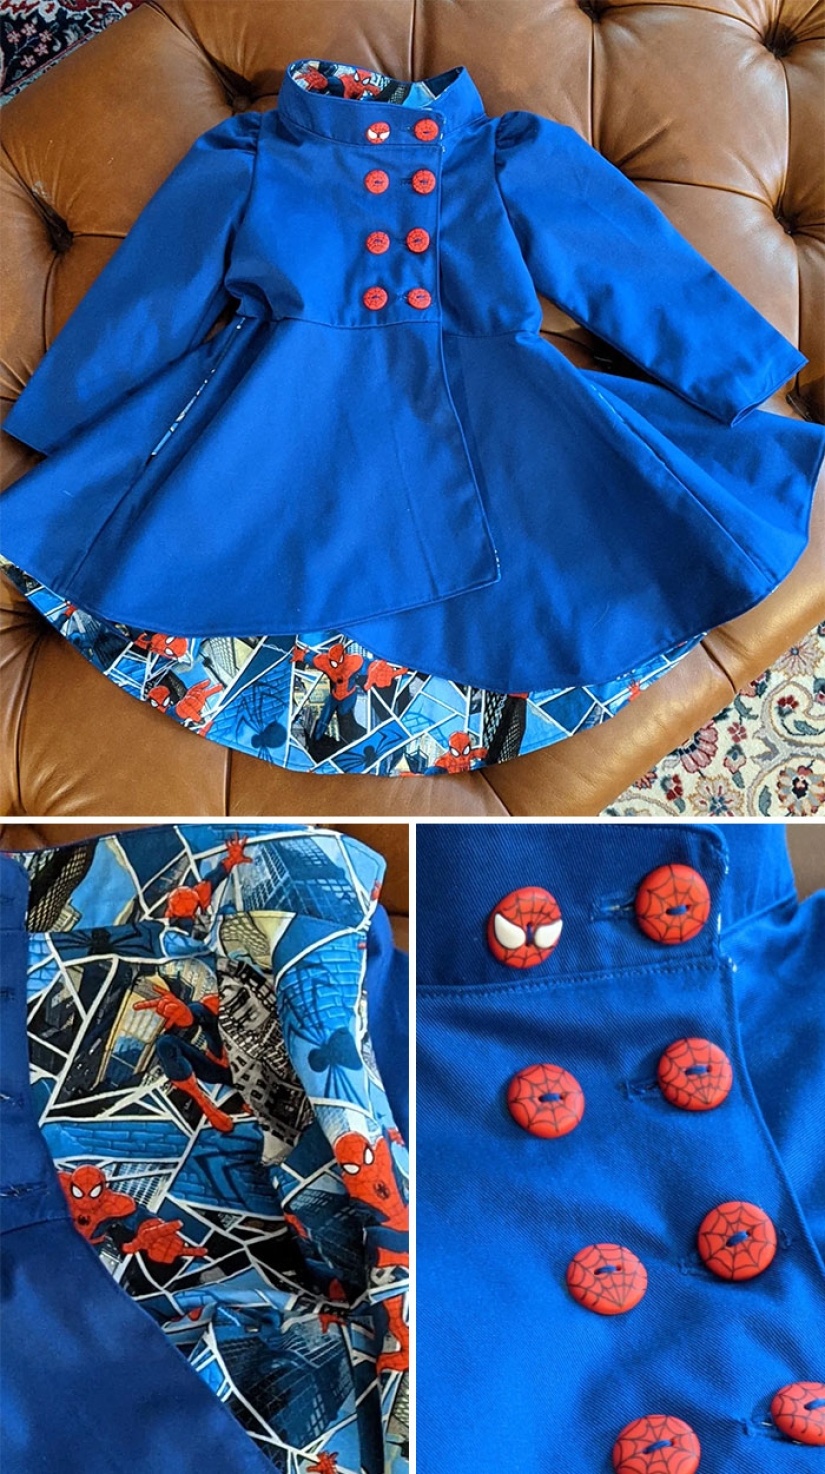 22 proofs that sewing is not only useful, but also interesting